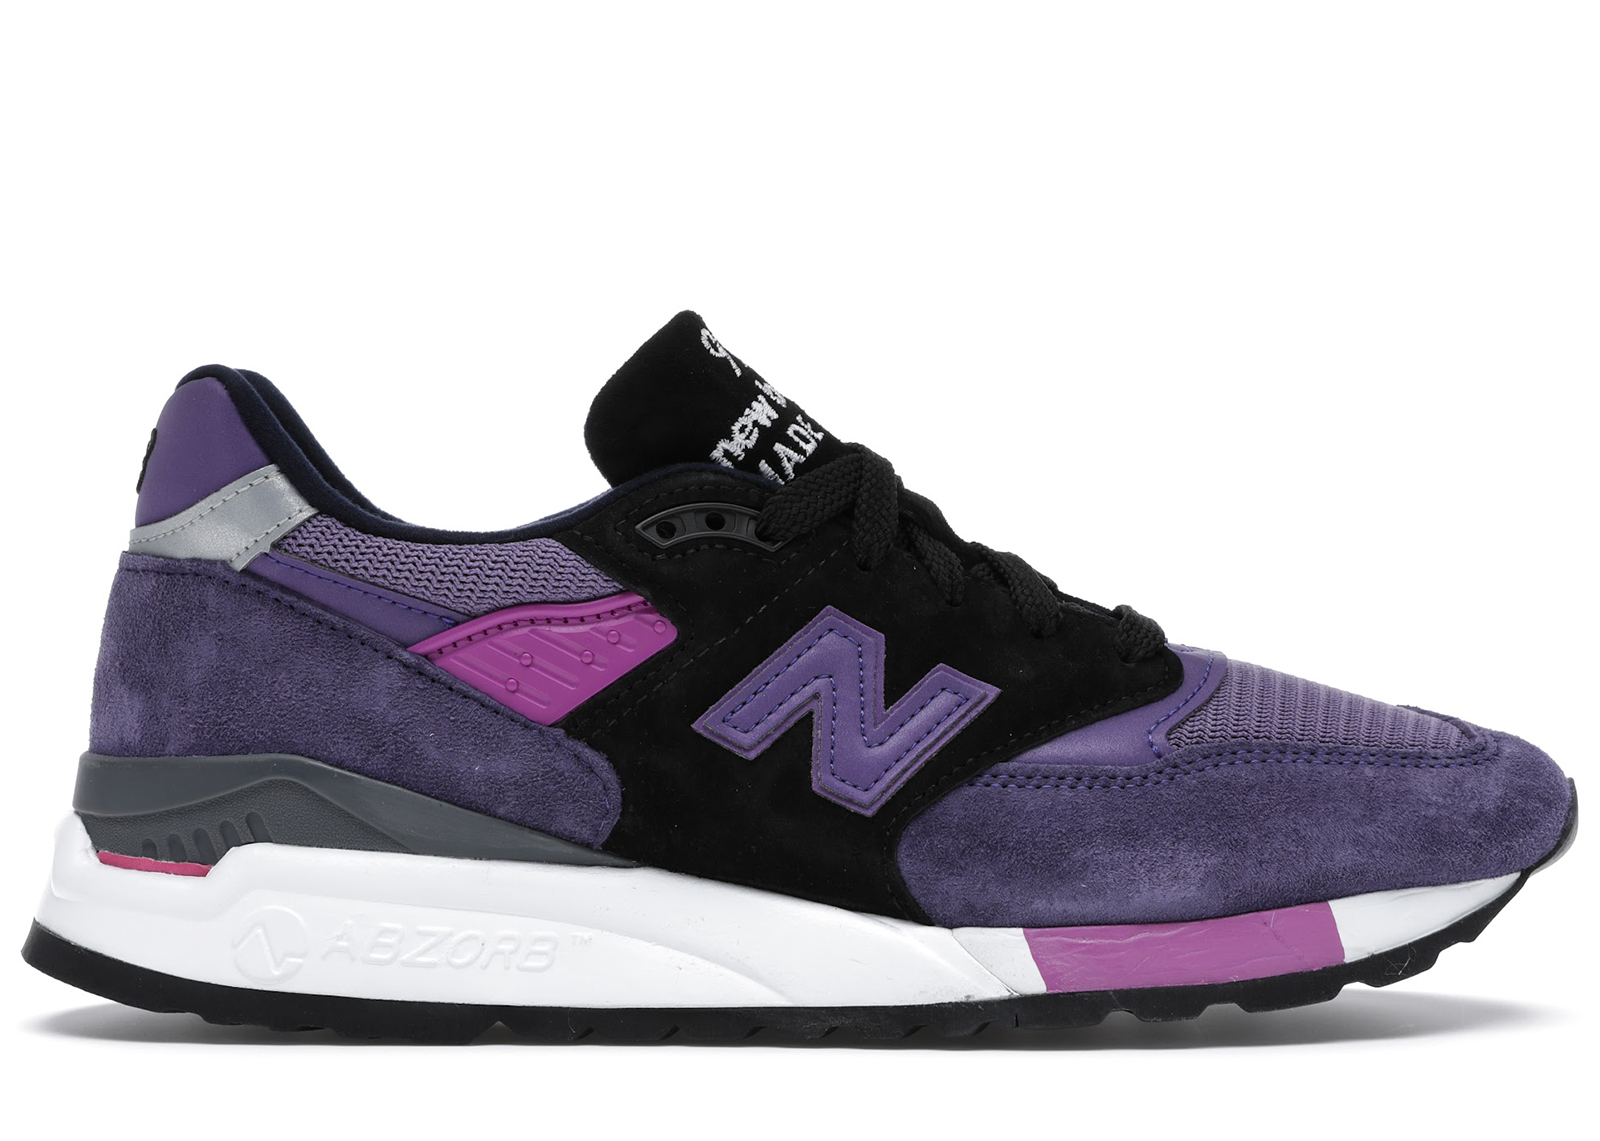 Buy New Balance 998 Shoes & Deadstock Sneakers